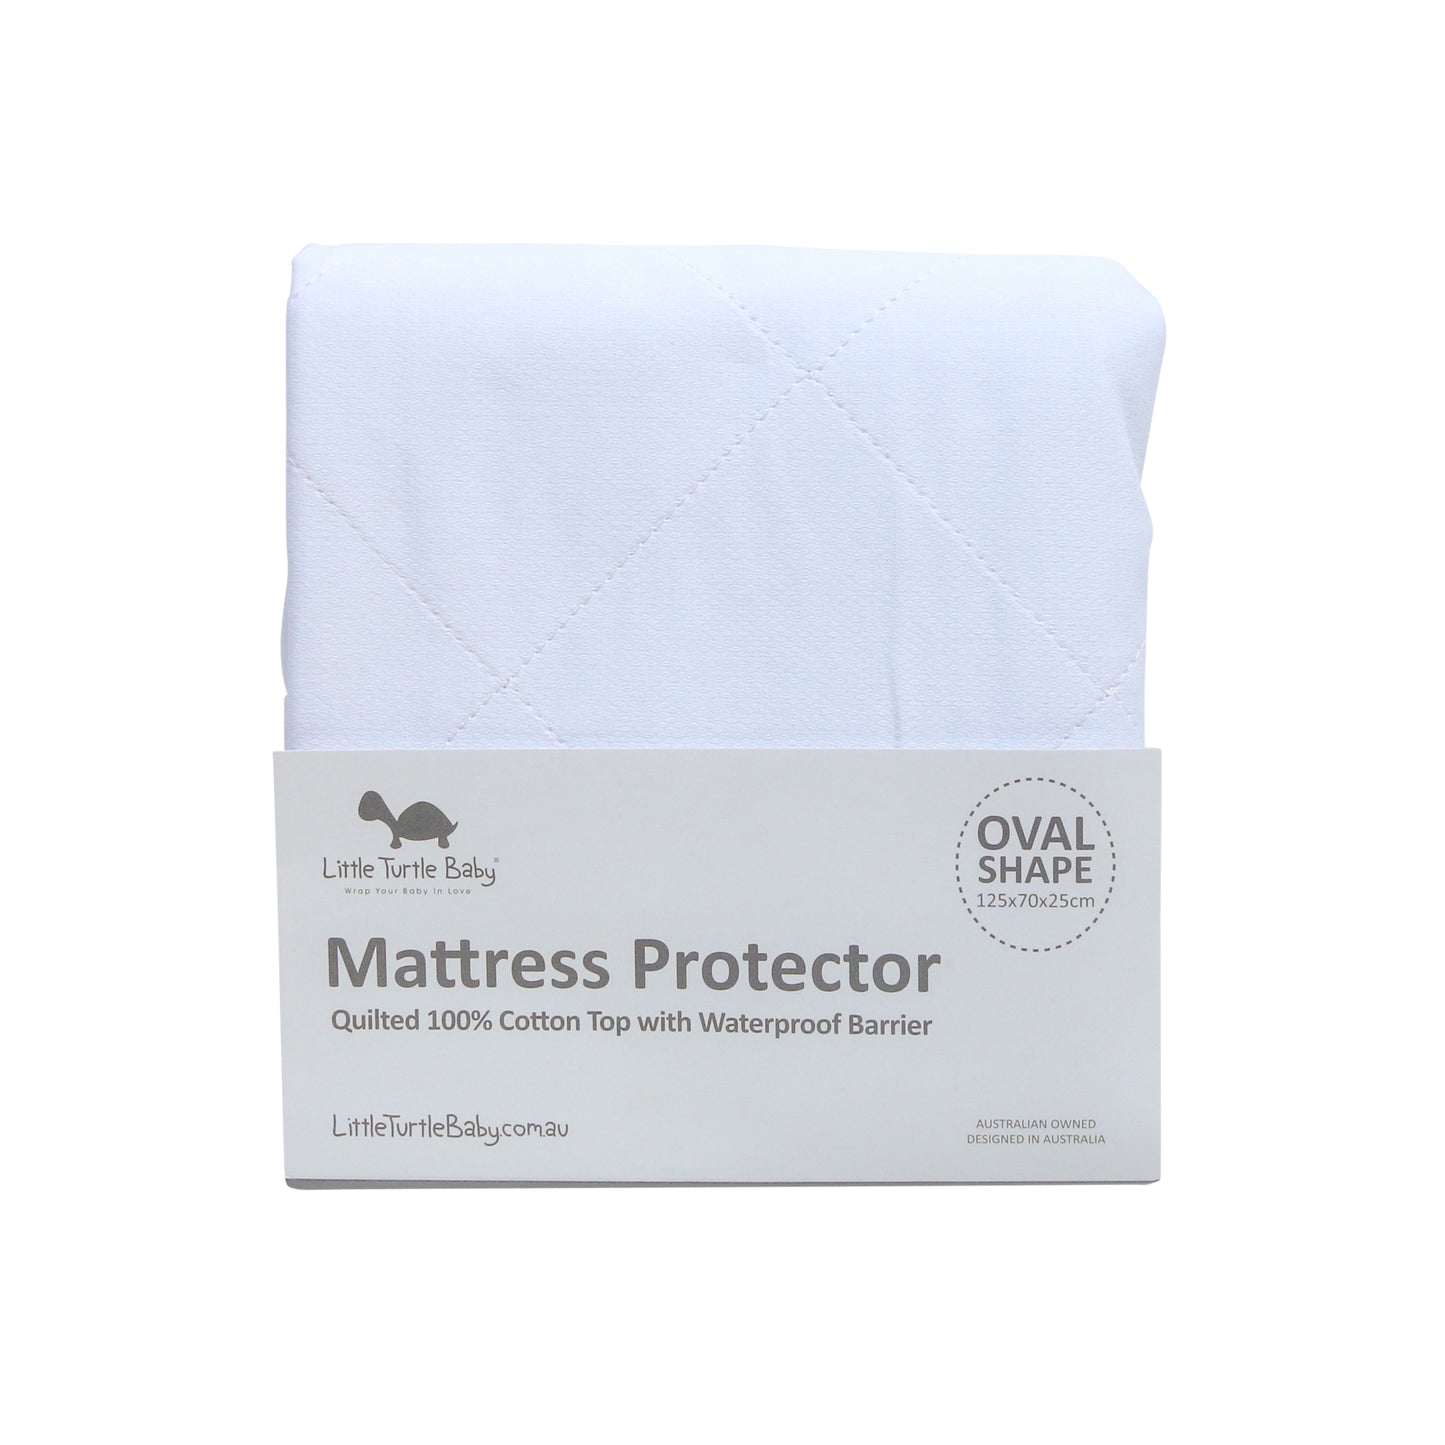 OVAL Cot Fitted Mattress Protector - Little Turtle Baby